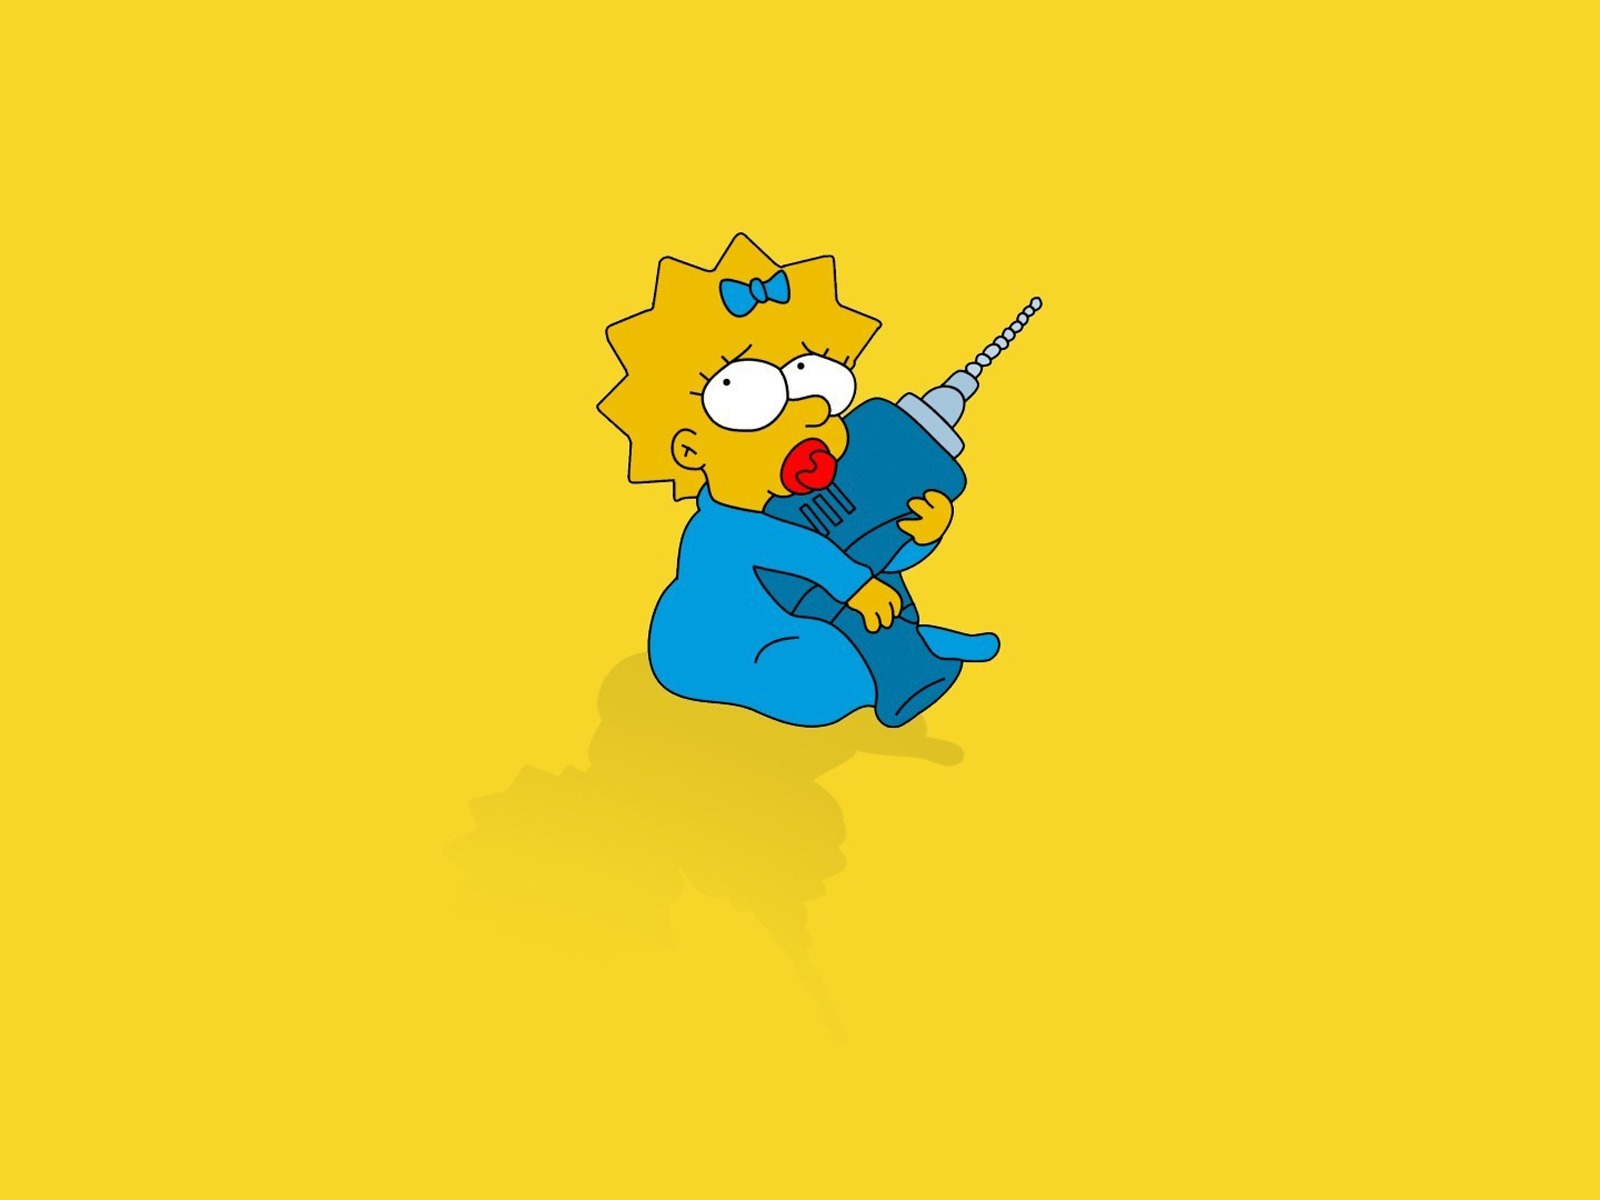 Maggie Simpson for 1600 x 1200 resolution